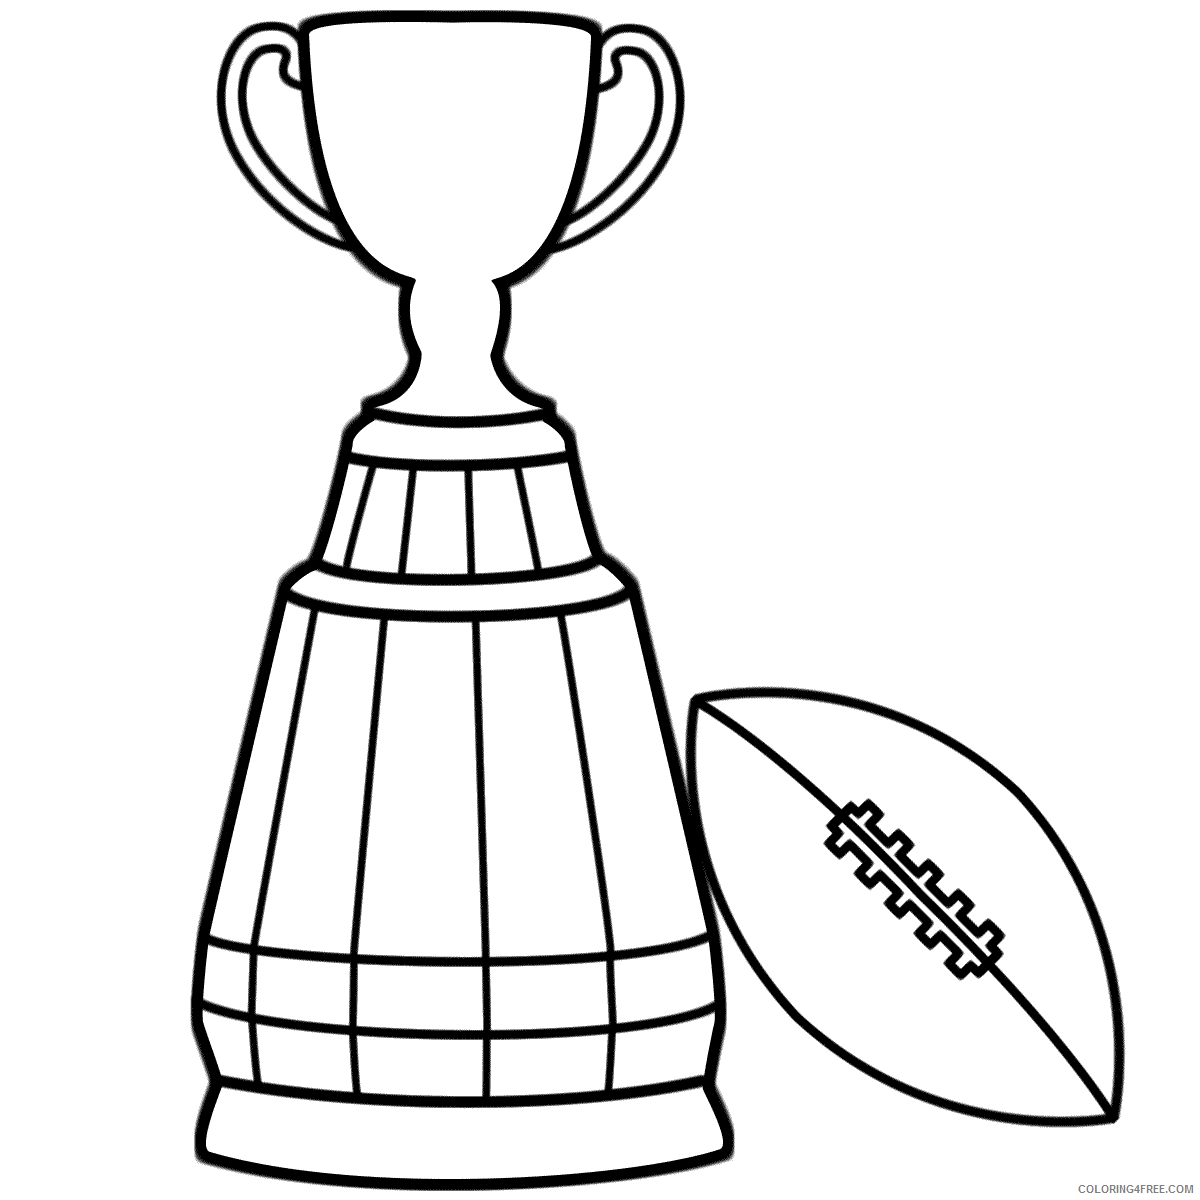 2016 Super Bowl Coloring Pages Printable Sheets Super Bowl Trophy with a 2021 09 492 Coloring4free